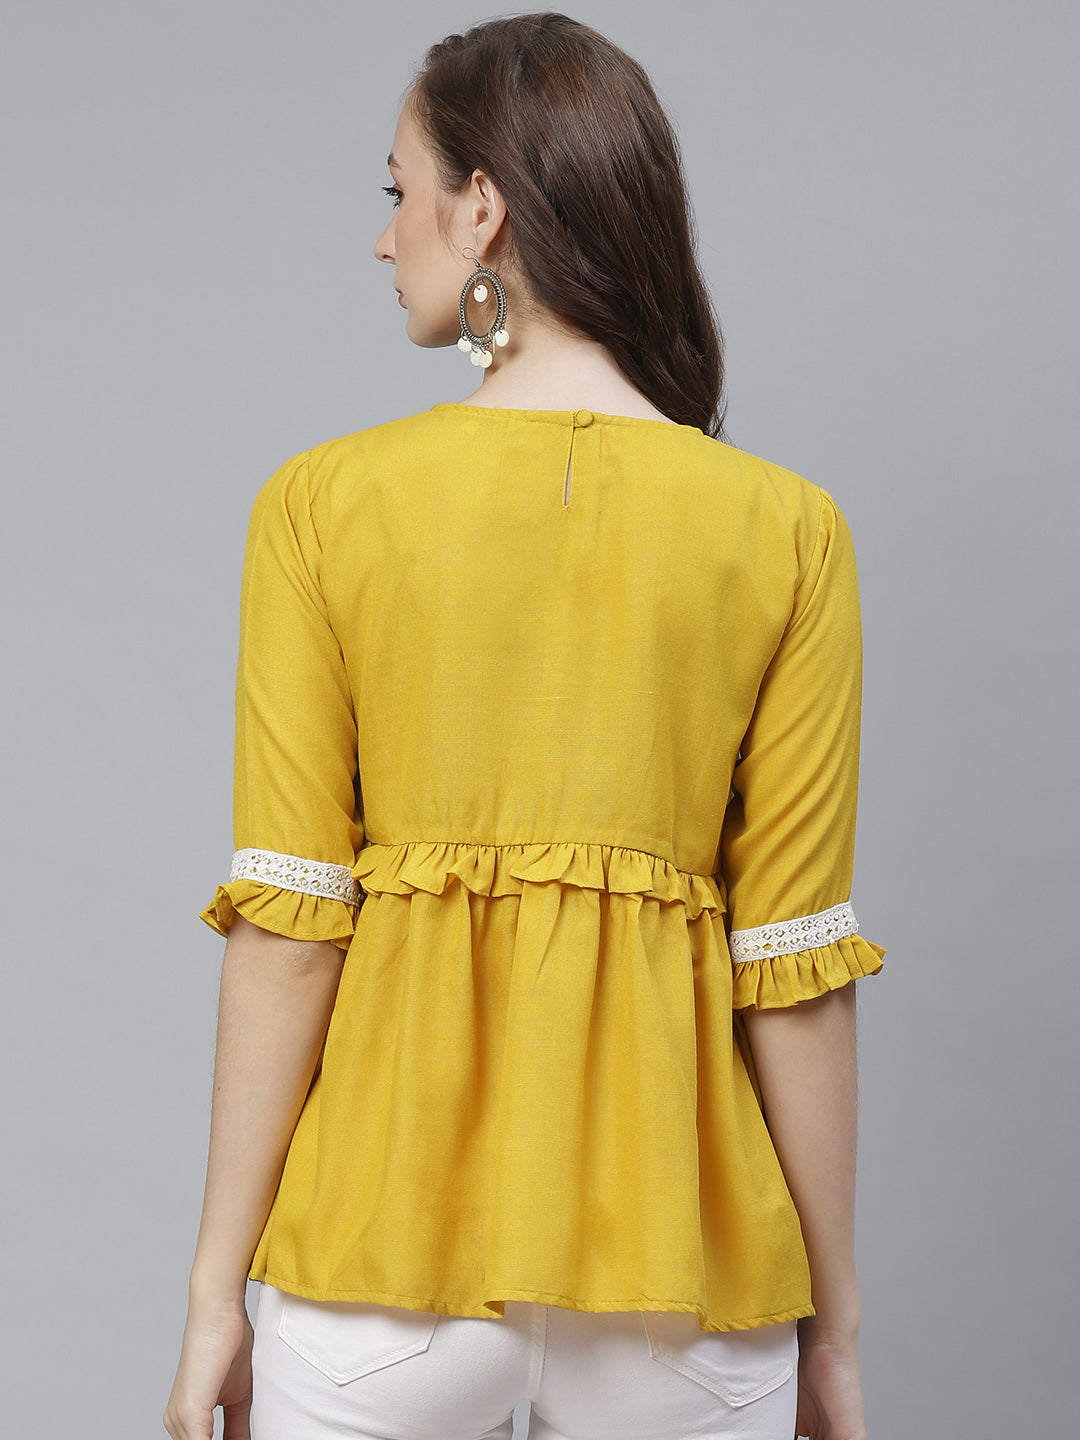 Bhama Couture Mustard Yellow Solid A-Line Top